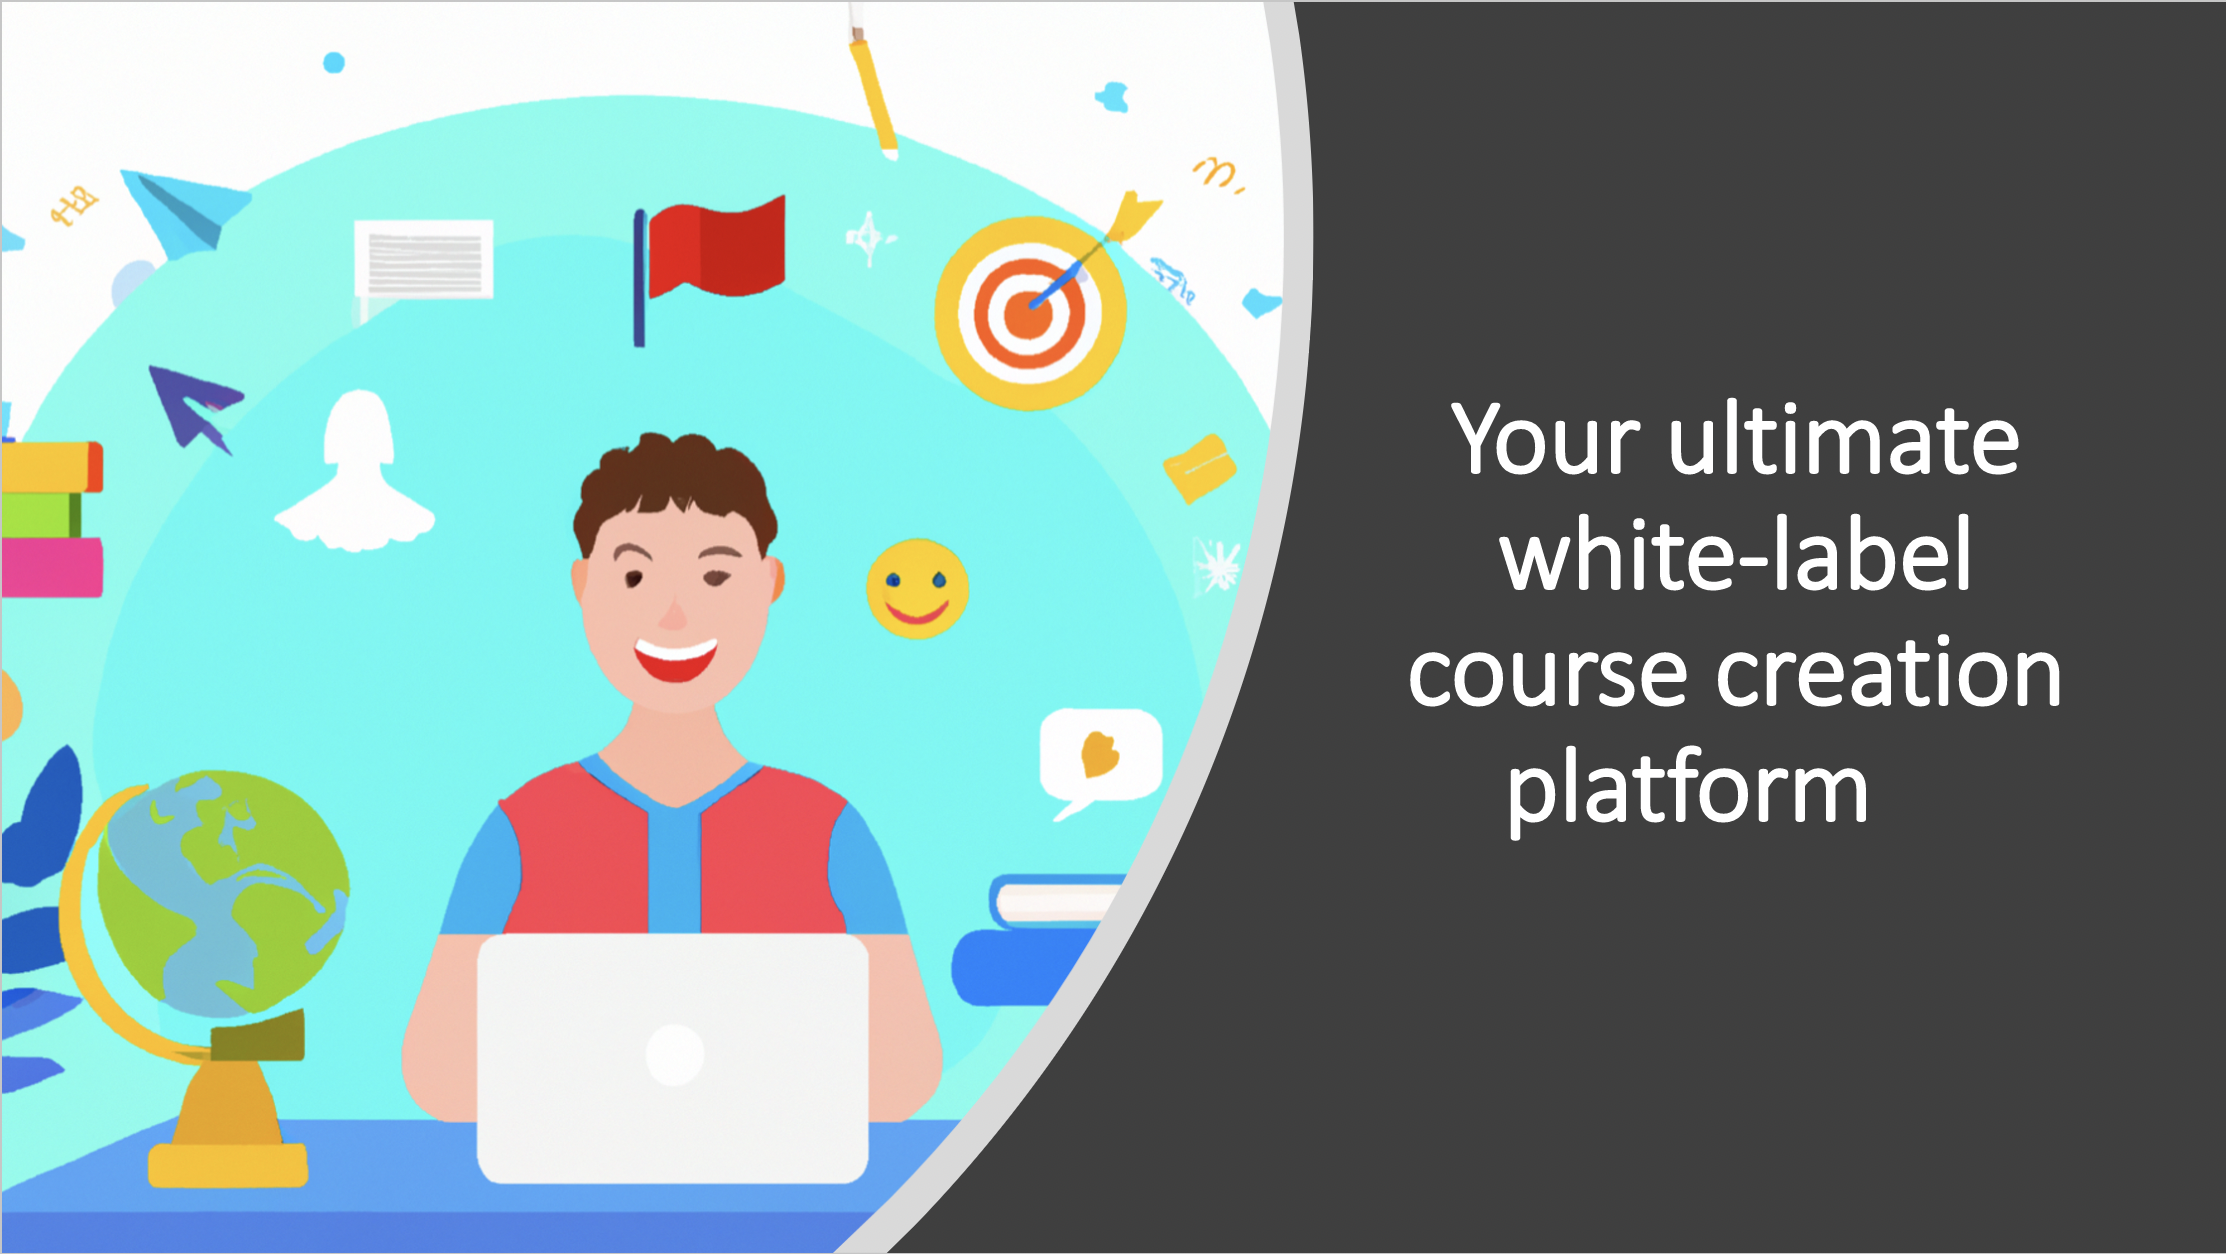 Your ultimate white-label course creation platform